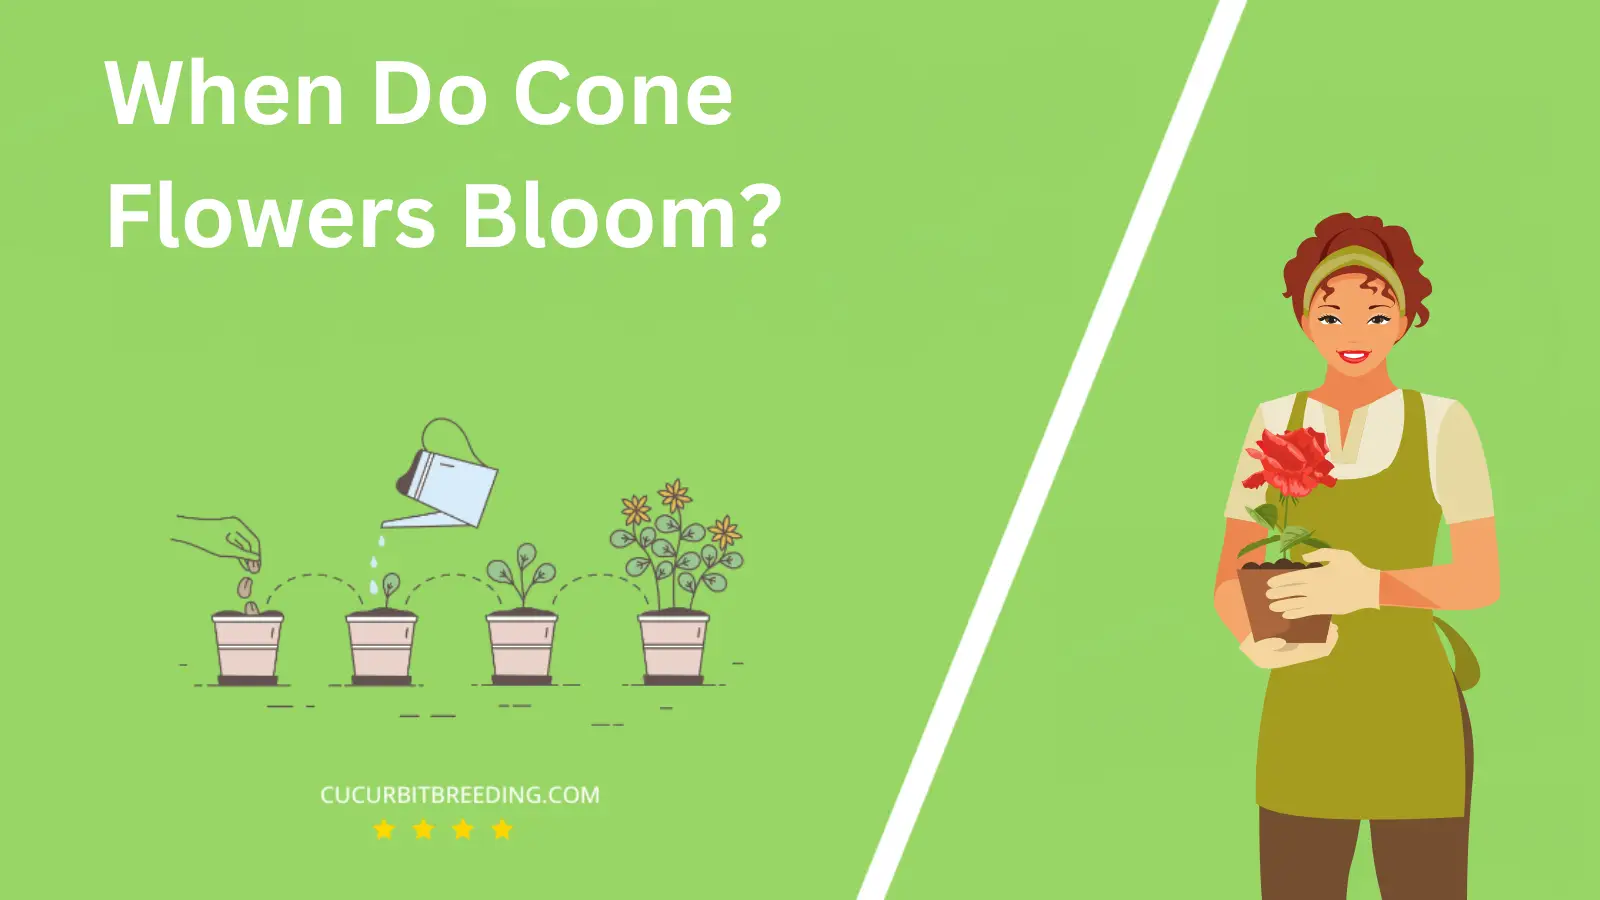 When Do Cone Flowers Bloom?